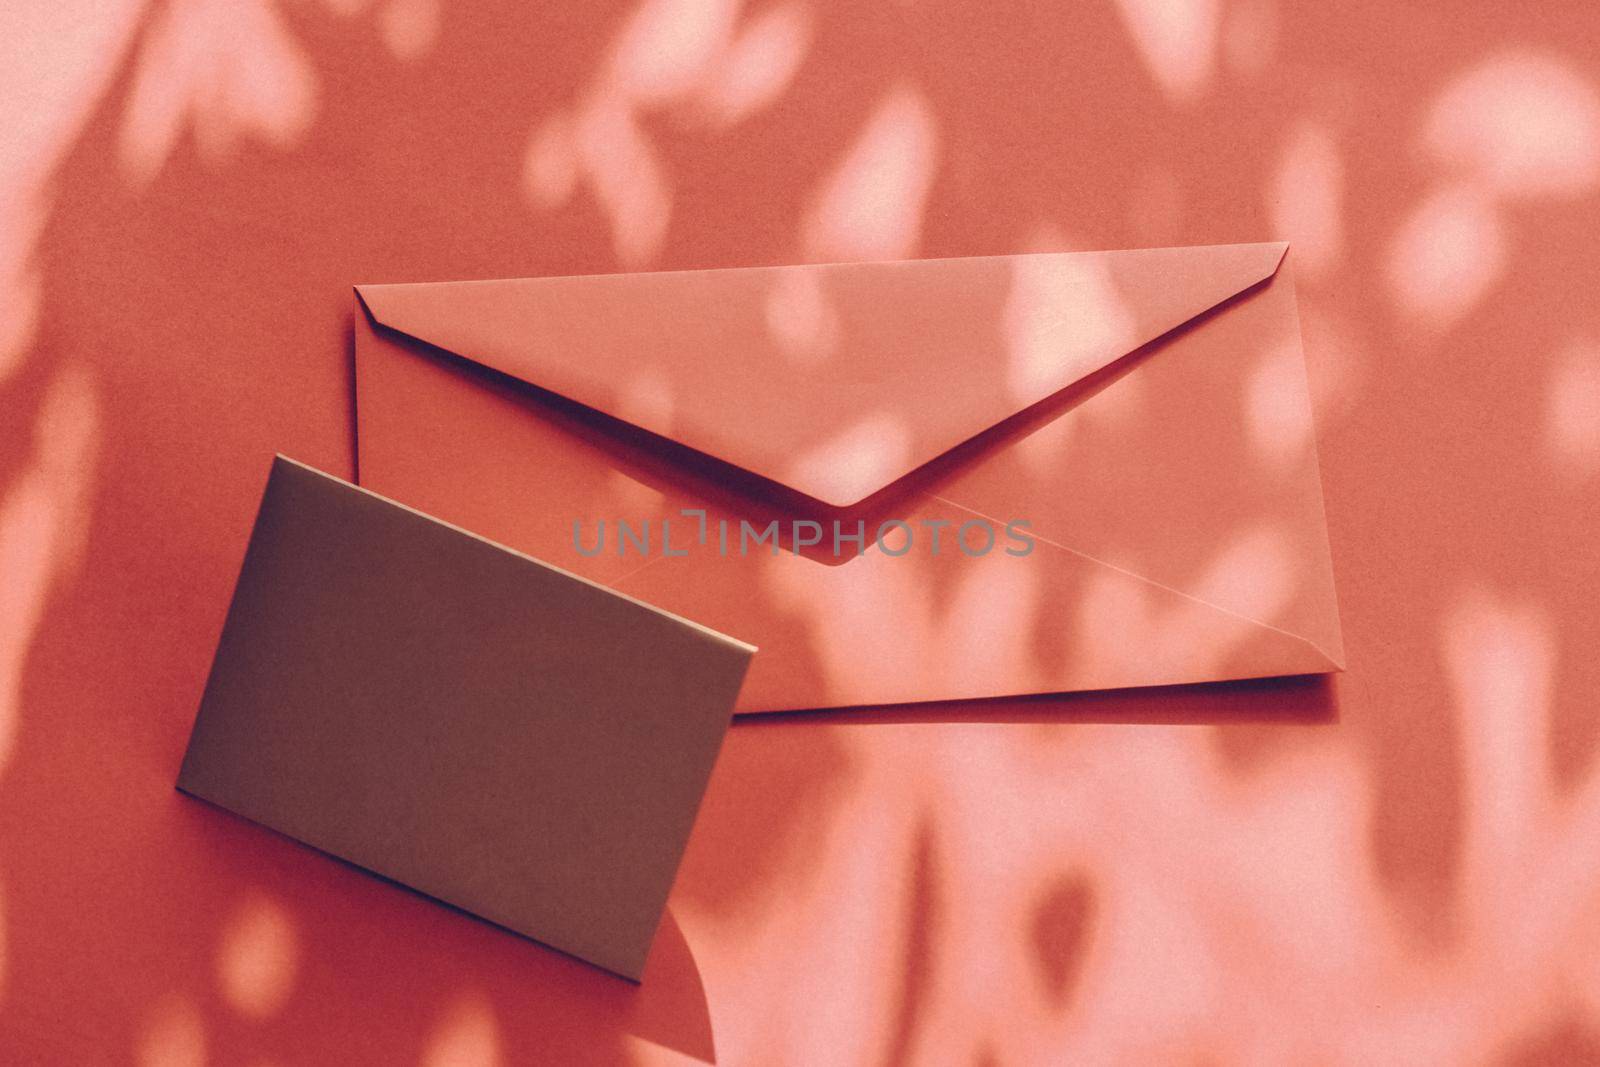 Beauty brand identity as flatlay mockup design, business card and letter for online luxury branding on orange shadow background by Anneleven